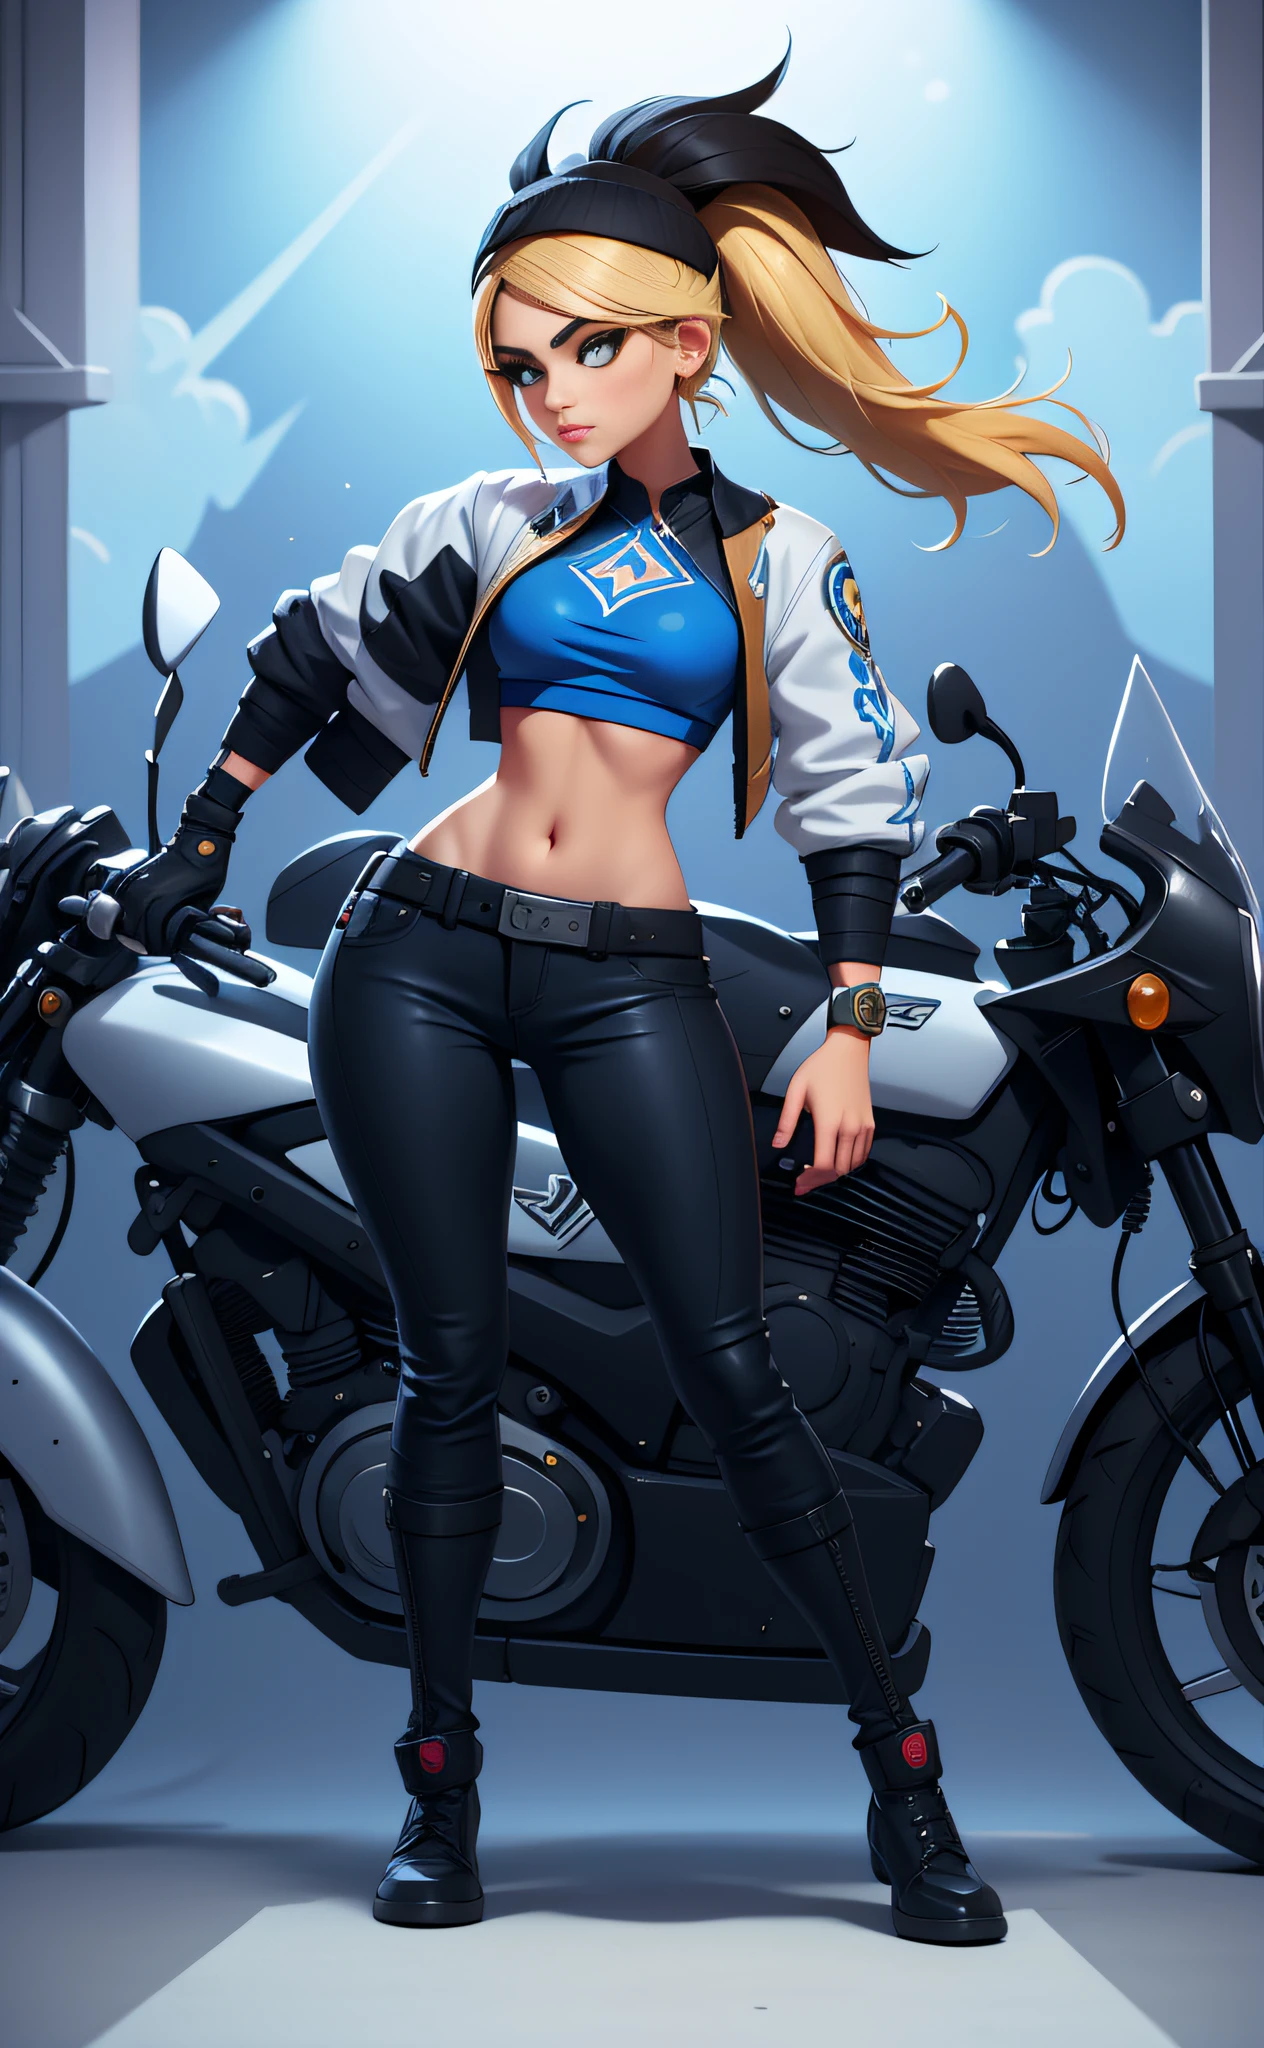 Akali,  league of legends, with blonde hair and blue top standing next to a motorcycle, kda, extremely detailed artgerm, style artgerm, artgerm jsc, ! dream artgerm, from league of legends, cushart kenz,